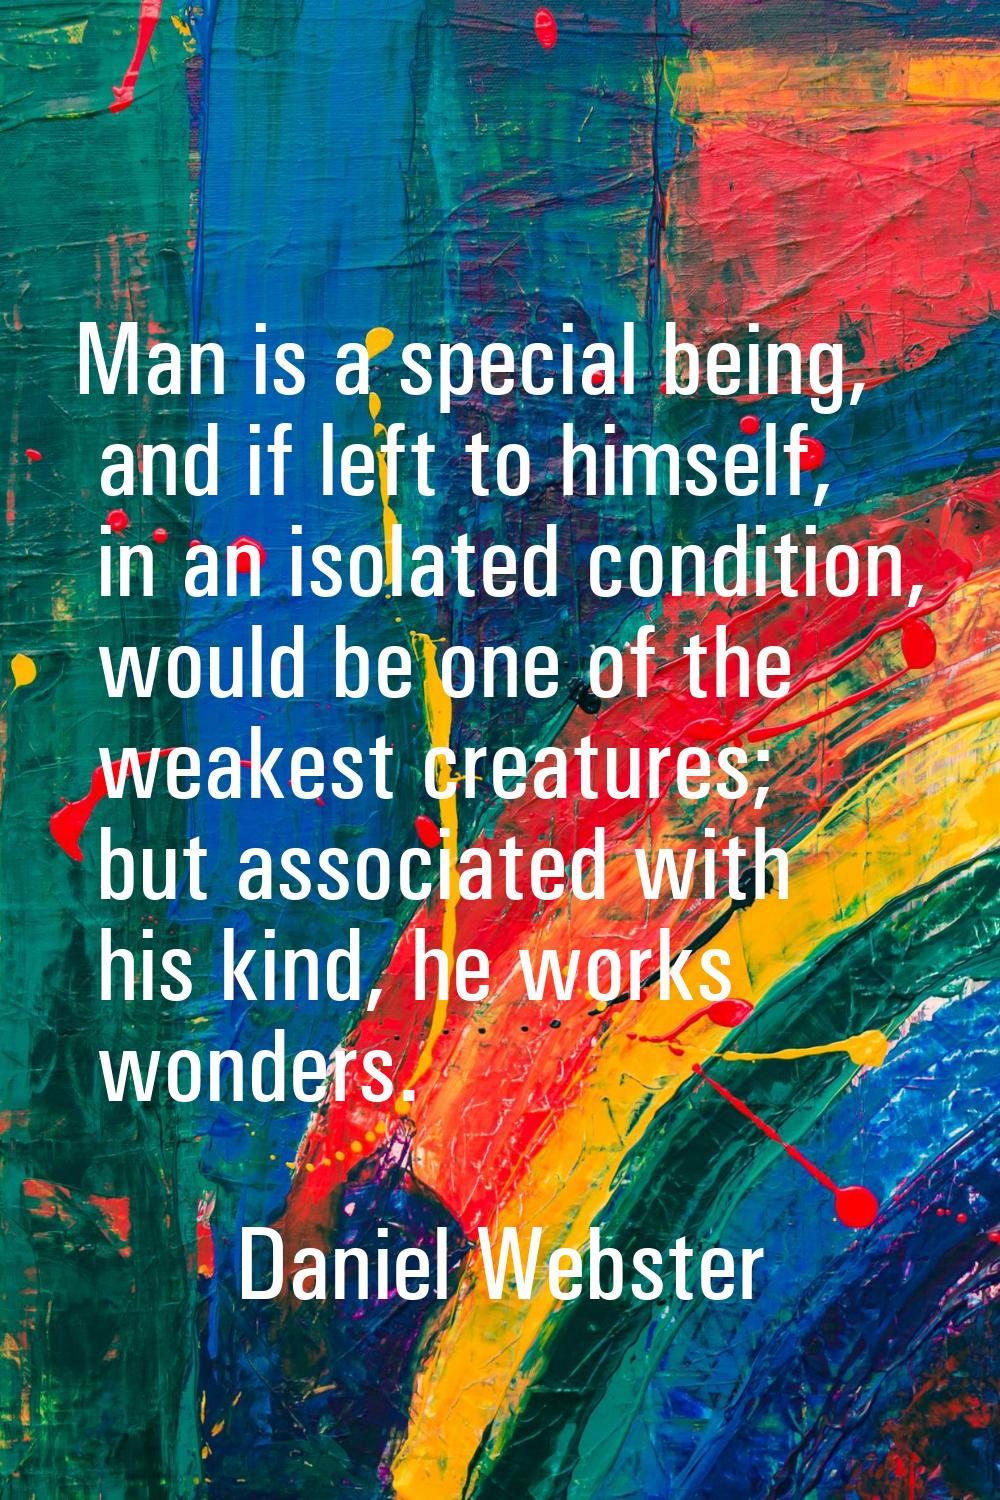 Man is a special being, and if left to himself, in an isolated condition, would be one of the weake